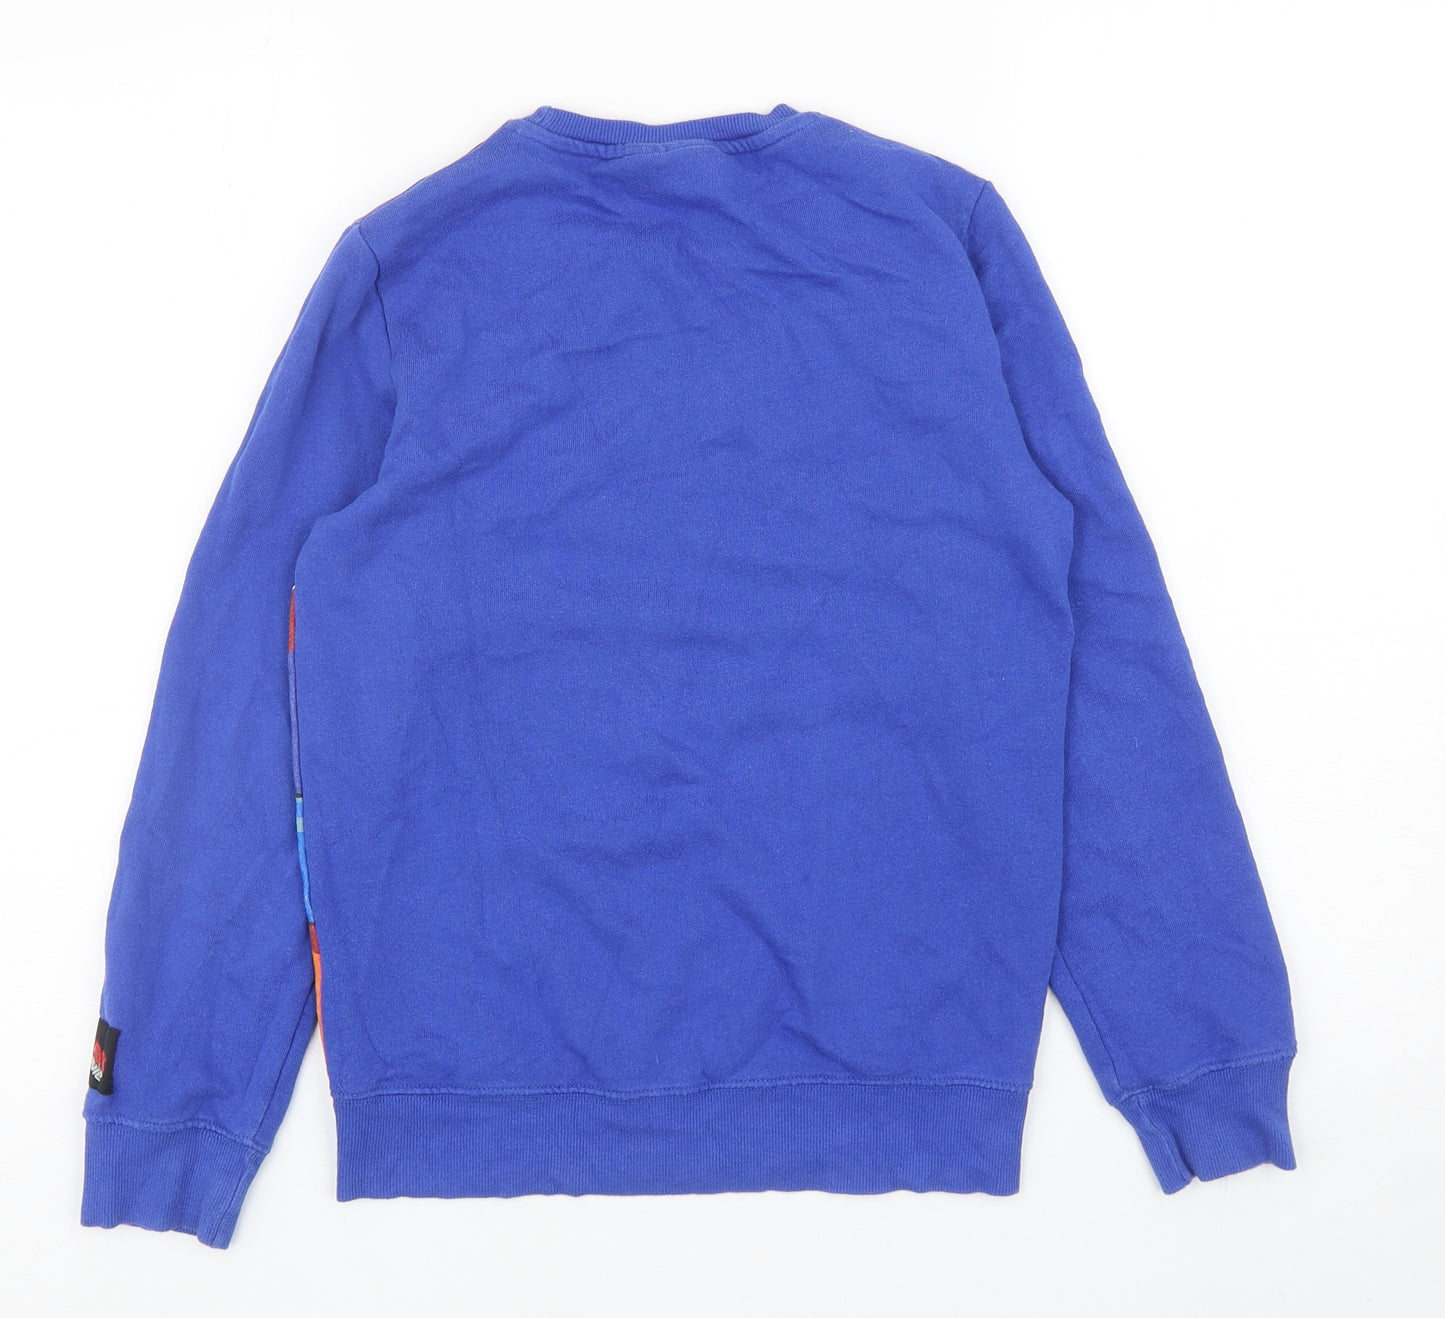 NEXT Boys Blue Cotton Pullover Sweatshirt Size 10 Years Pullover - Lego